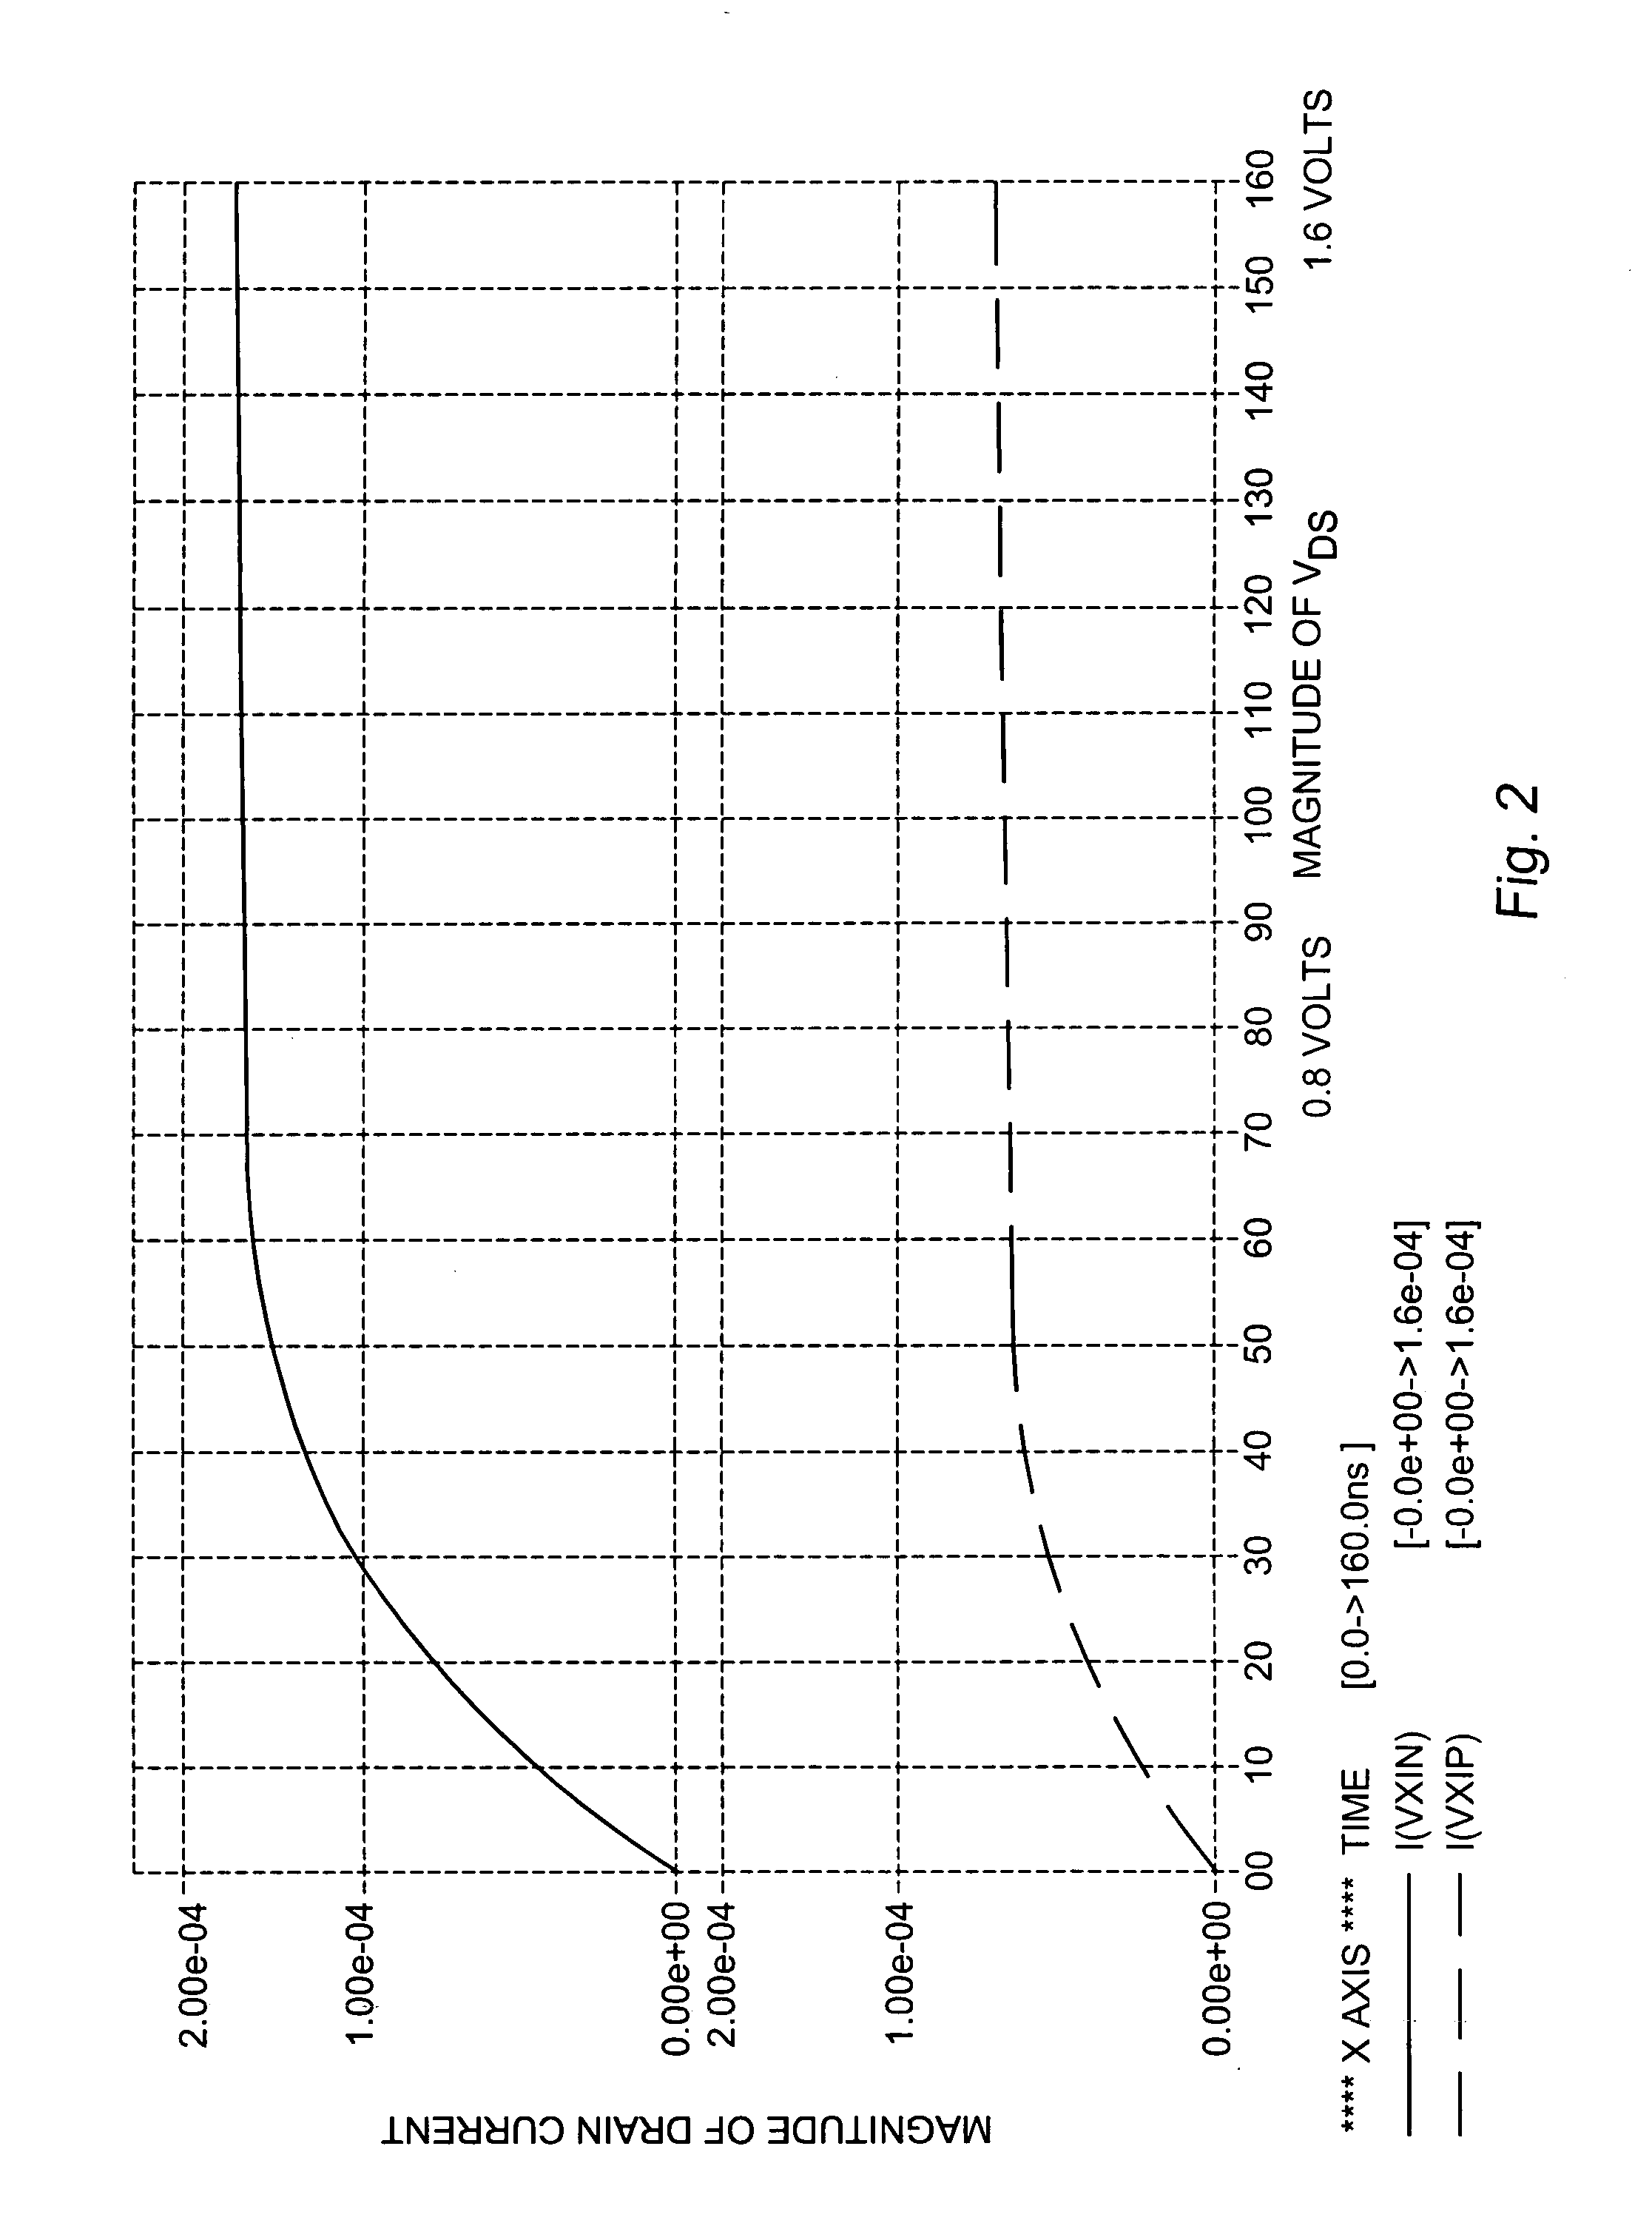 Low voltage differential amplifier circuit for wide voltage range operation